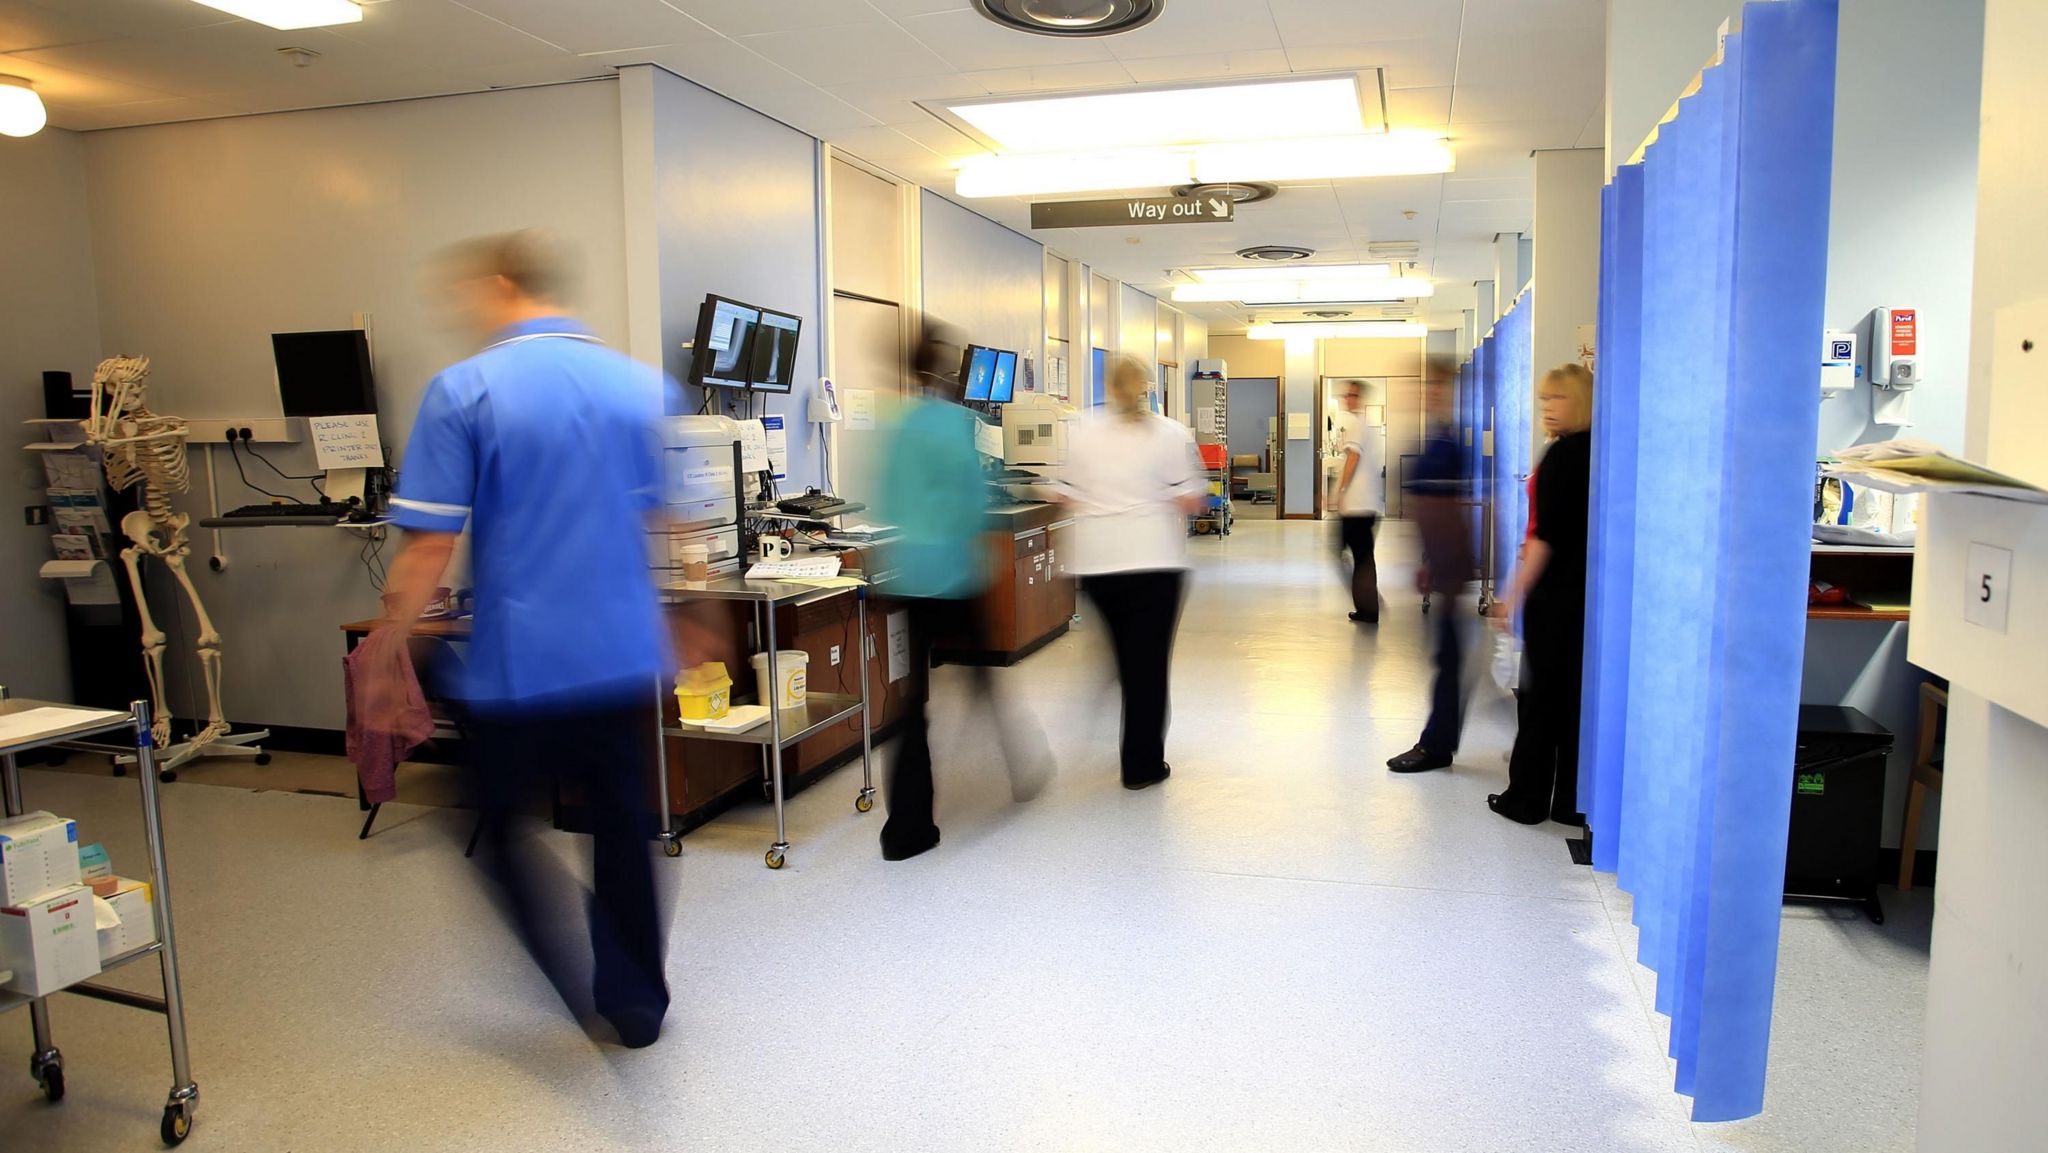 A hospital ward, with blurred nurses and doctors wearing blue tops walking near blue curtained bays. 